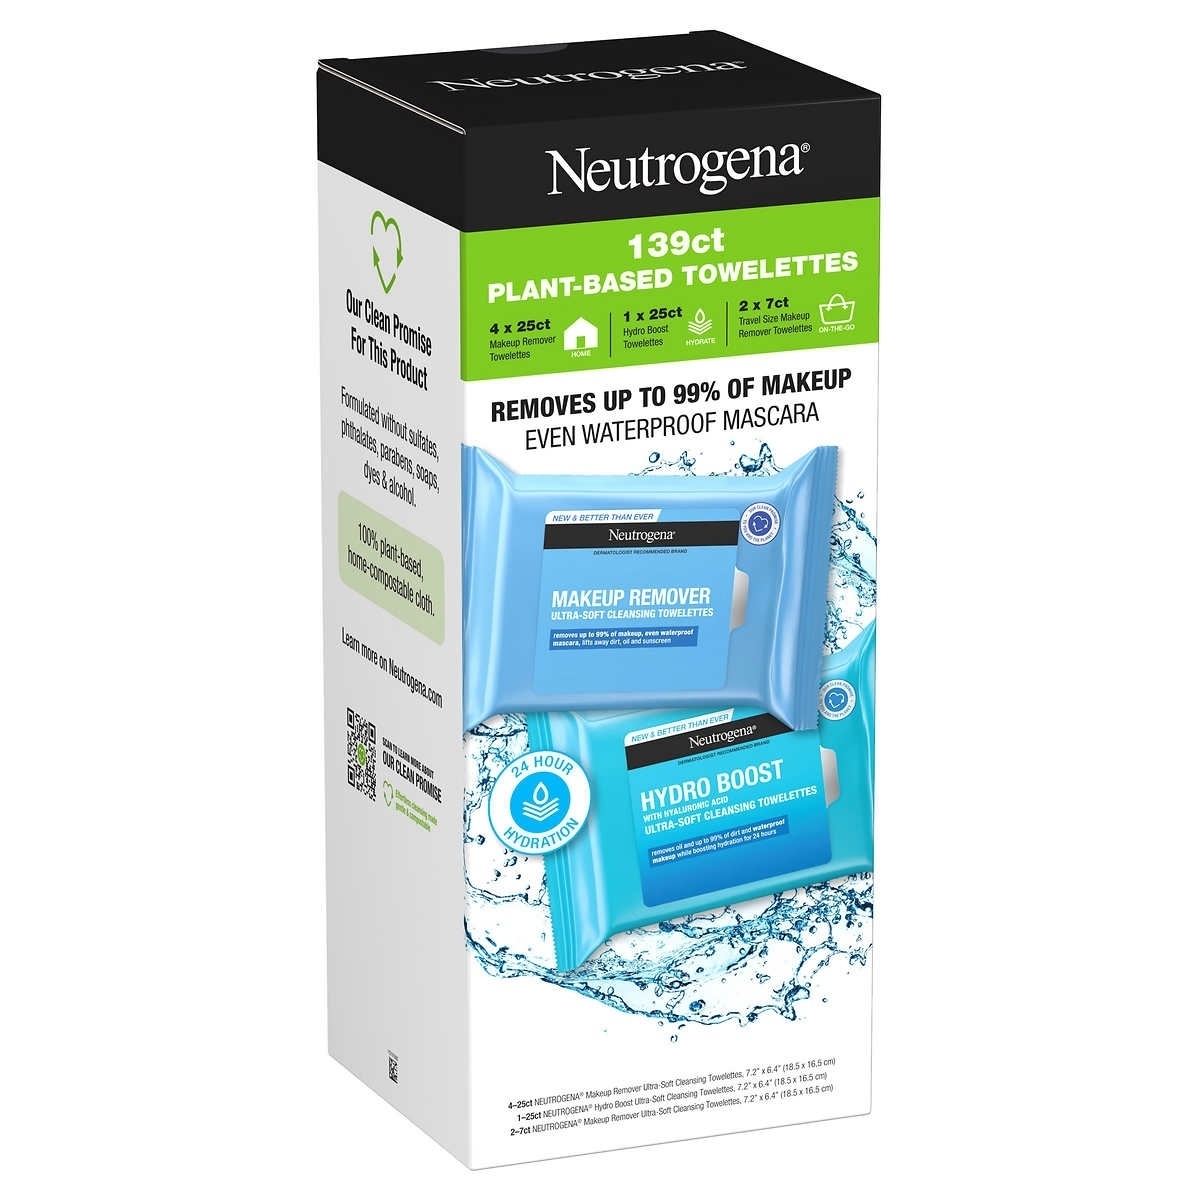 Neutrogena Makeup Remover & Hydro Boost Ultra-Soft Cleansing Towelettes, 139 Ct